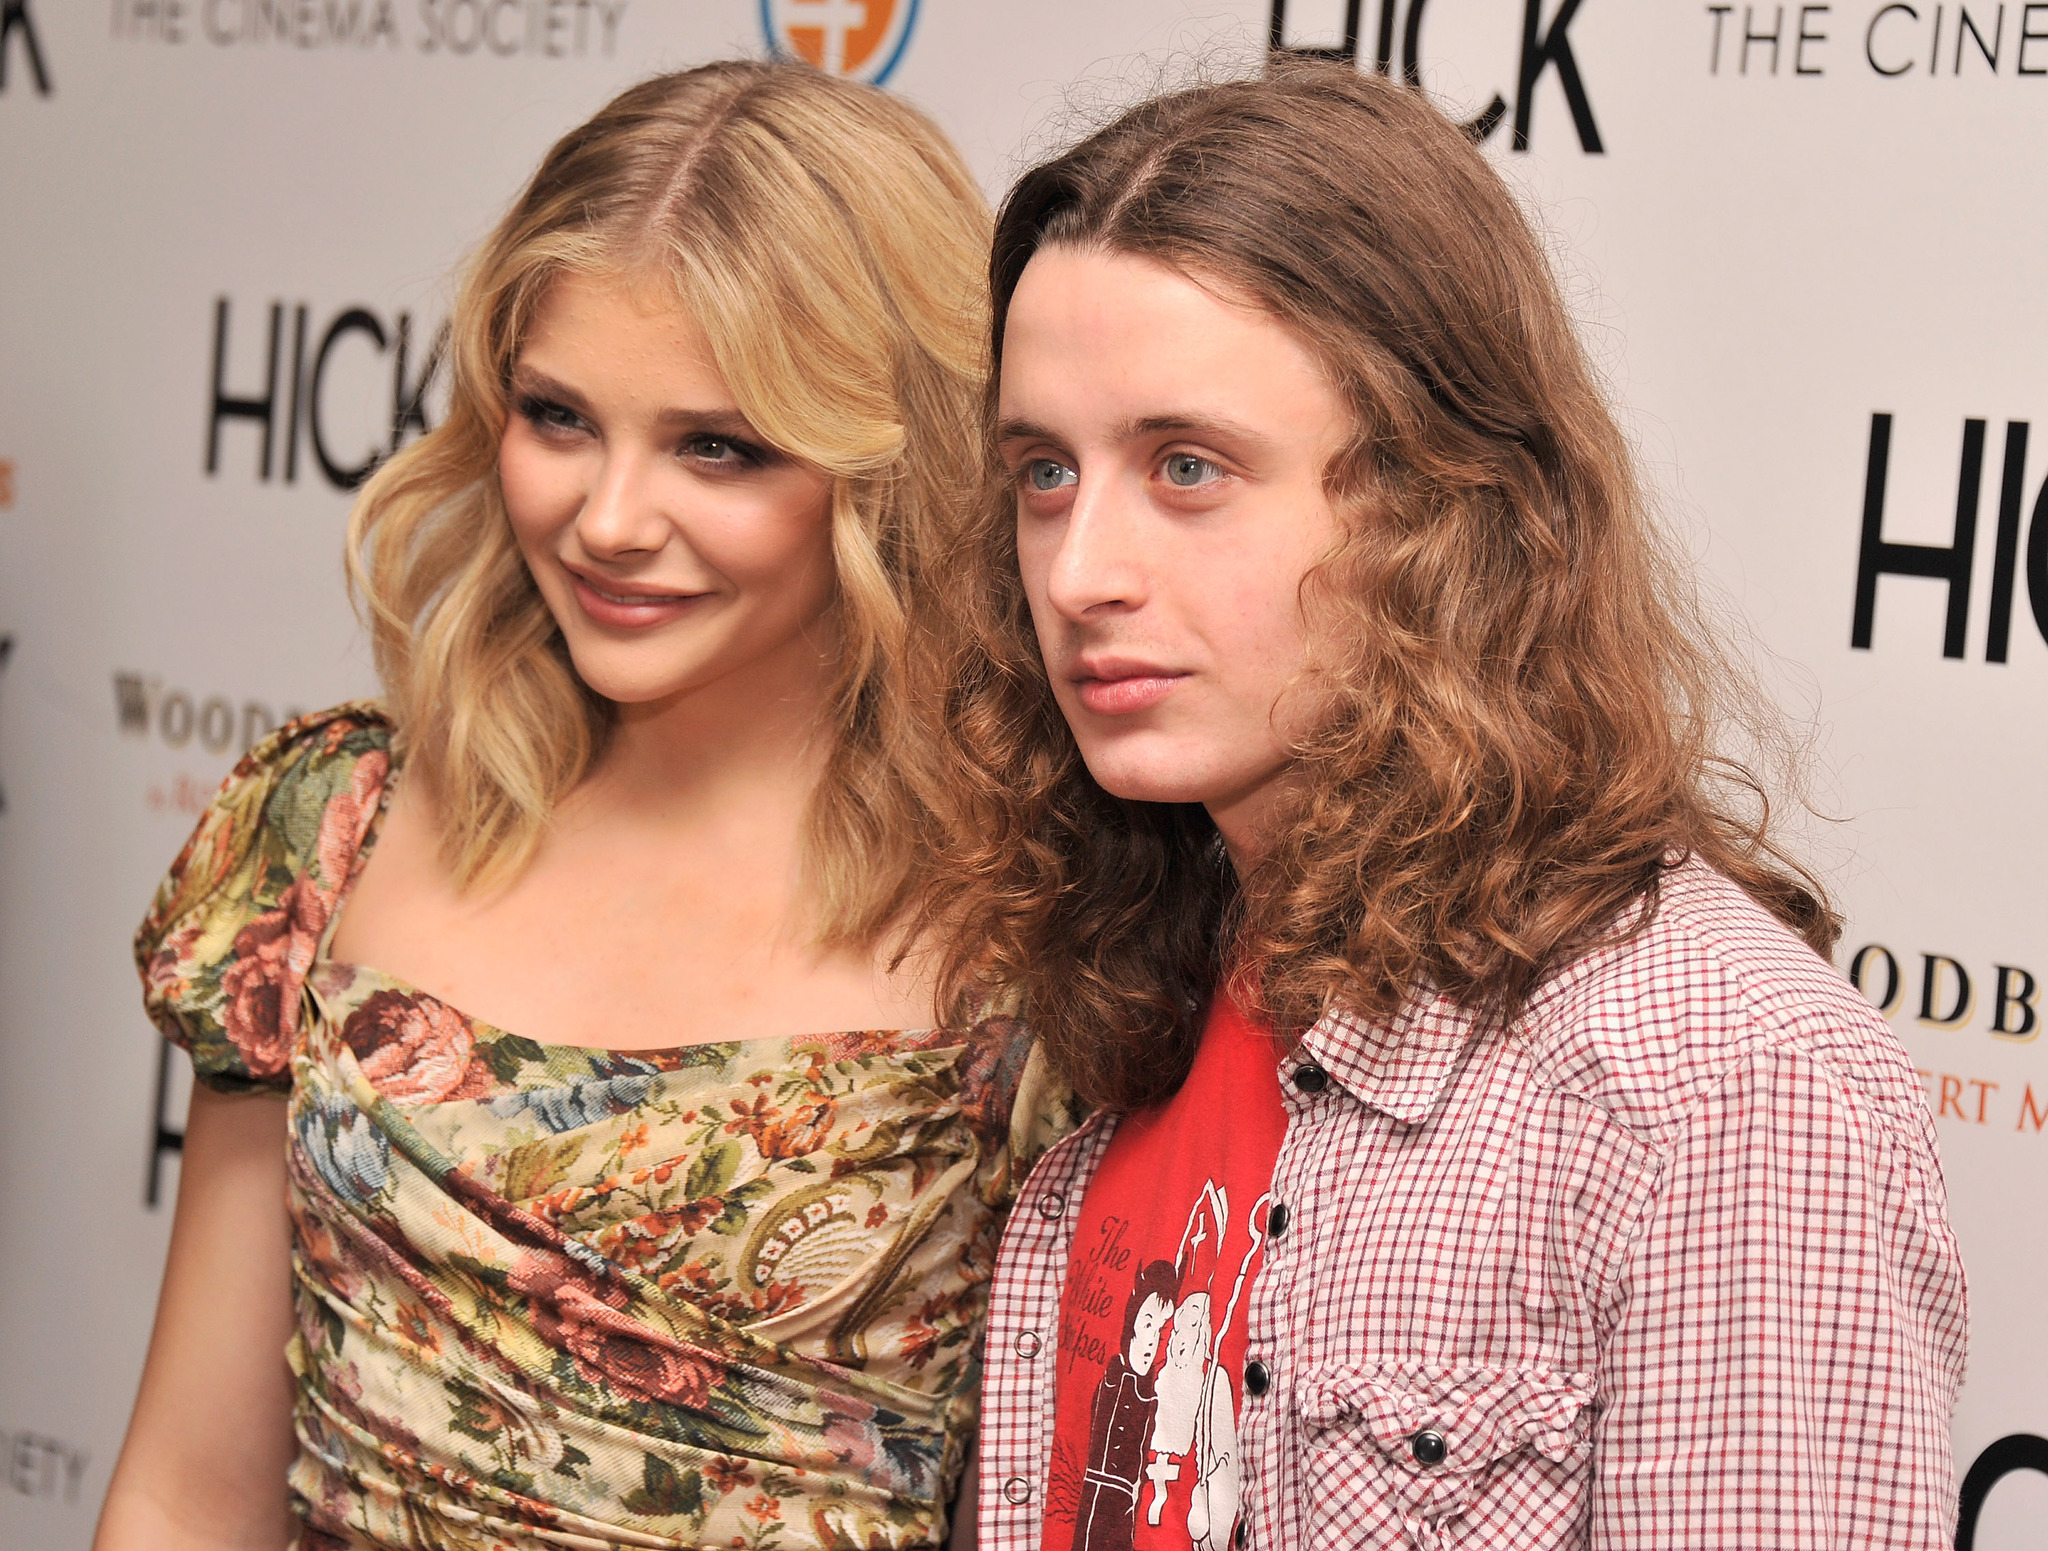 Rory Culkin and Chloë Grace Moretz at event of Hick (2011)